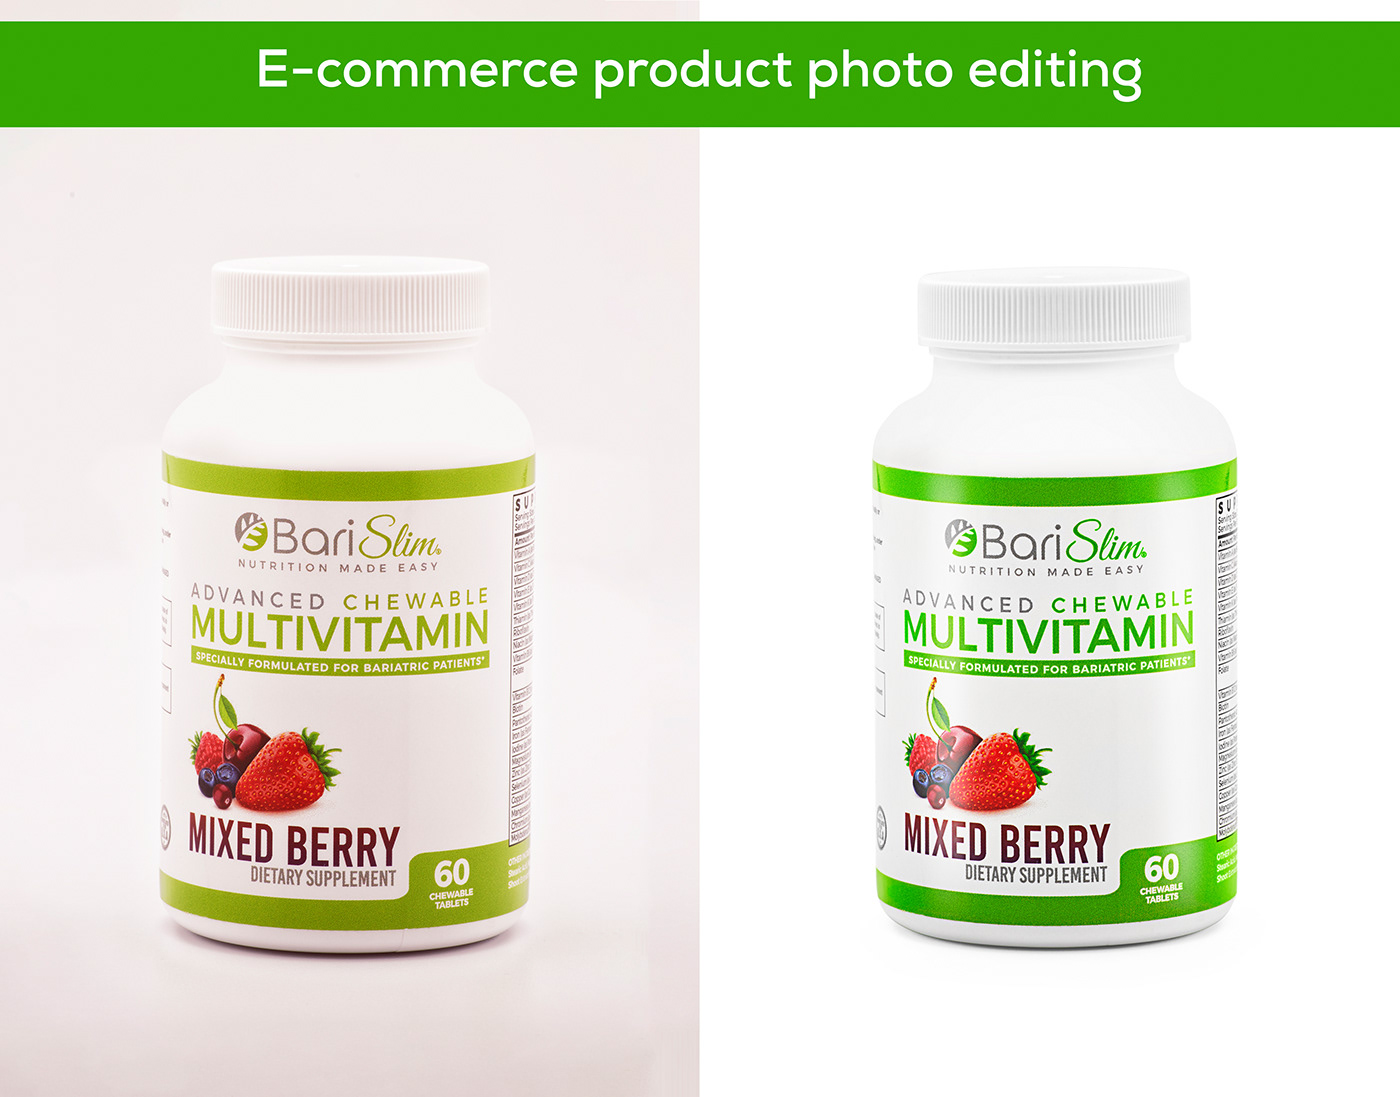 Amazon product editing E-commerce Product Photo Editing  Image Editing photo editing Photo Retouching Photoshop Editing Product Photo Editing Product Editing Background Remove